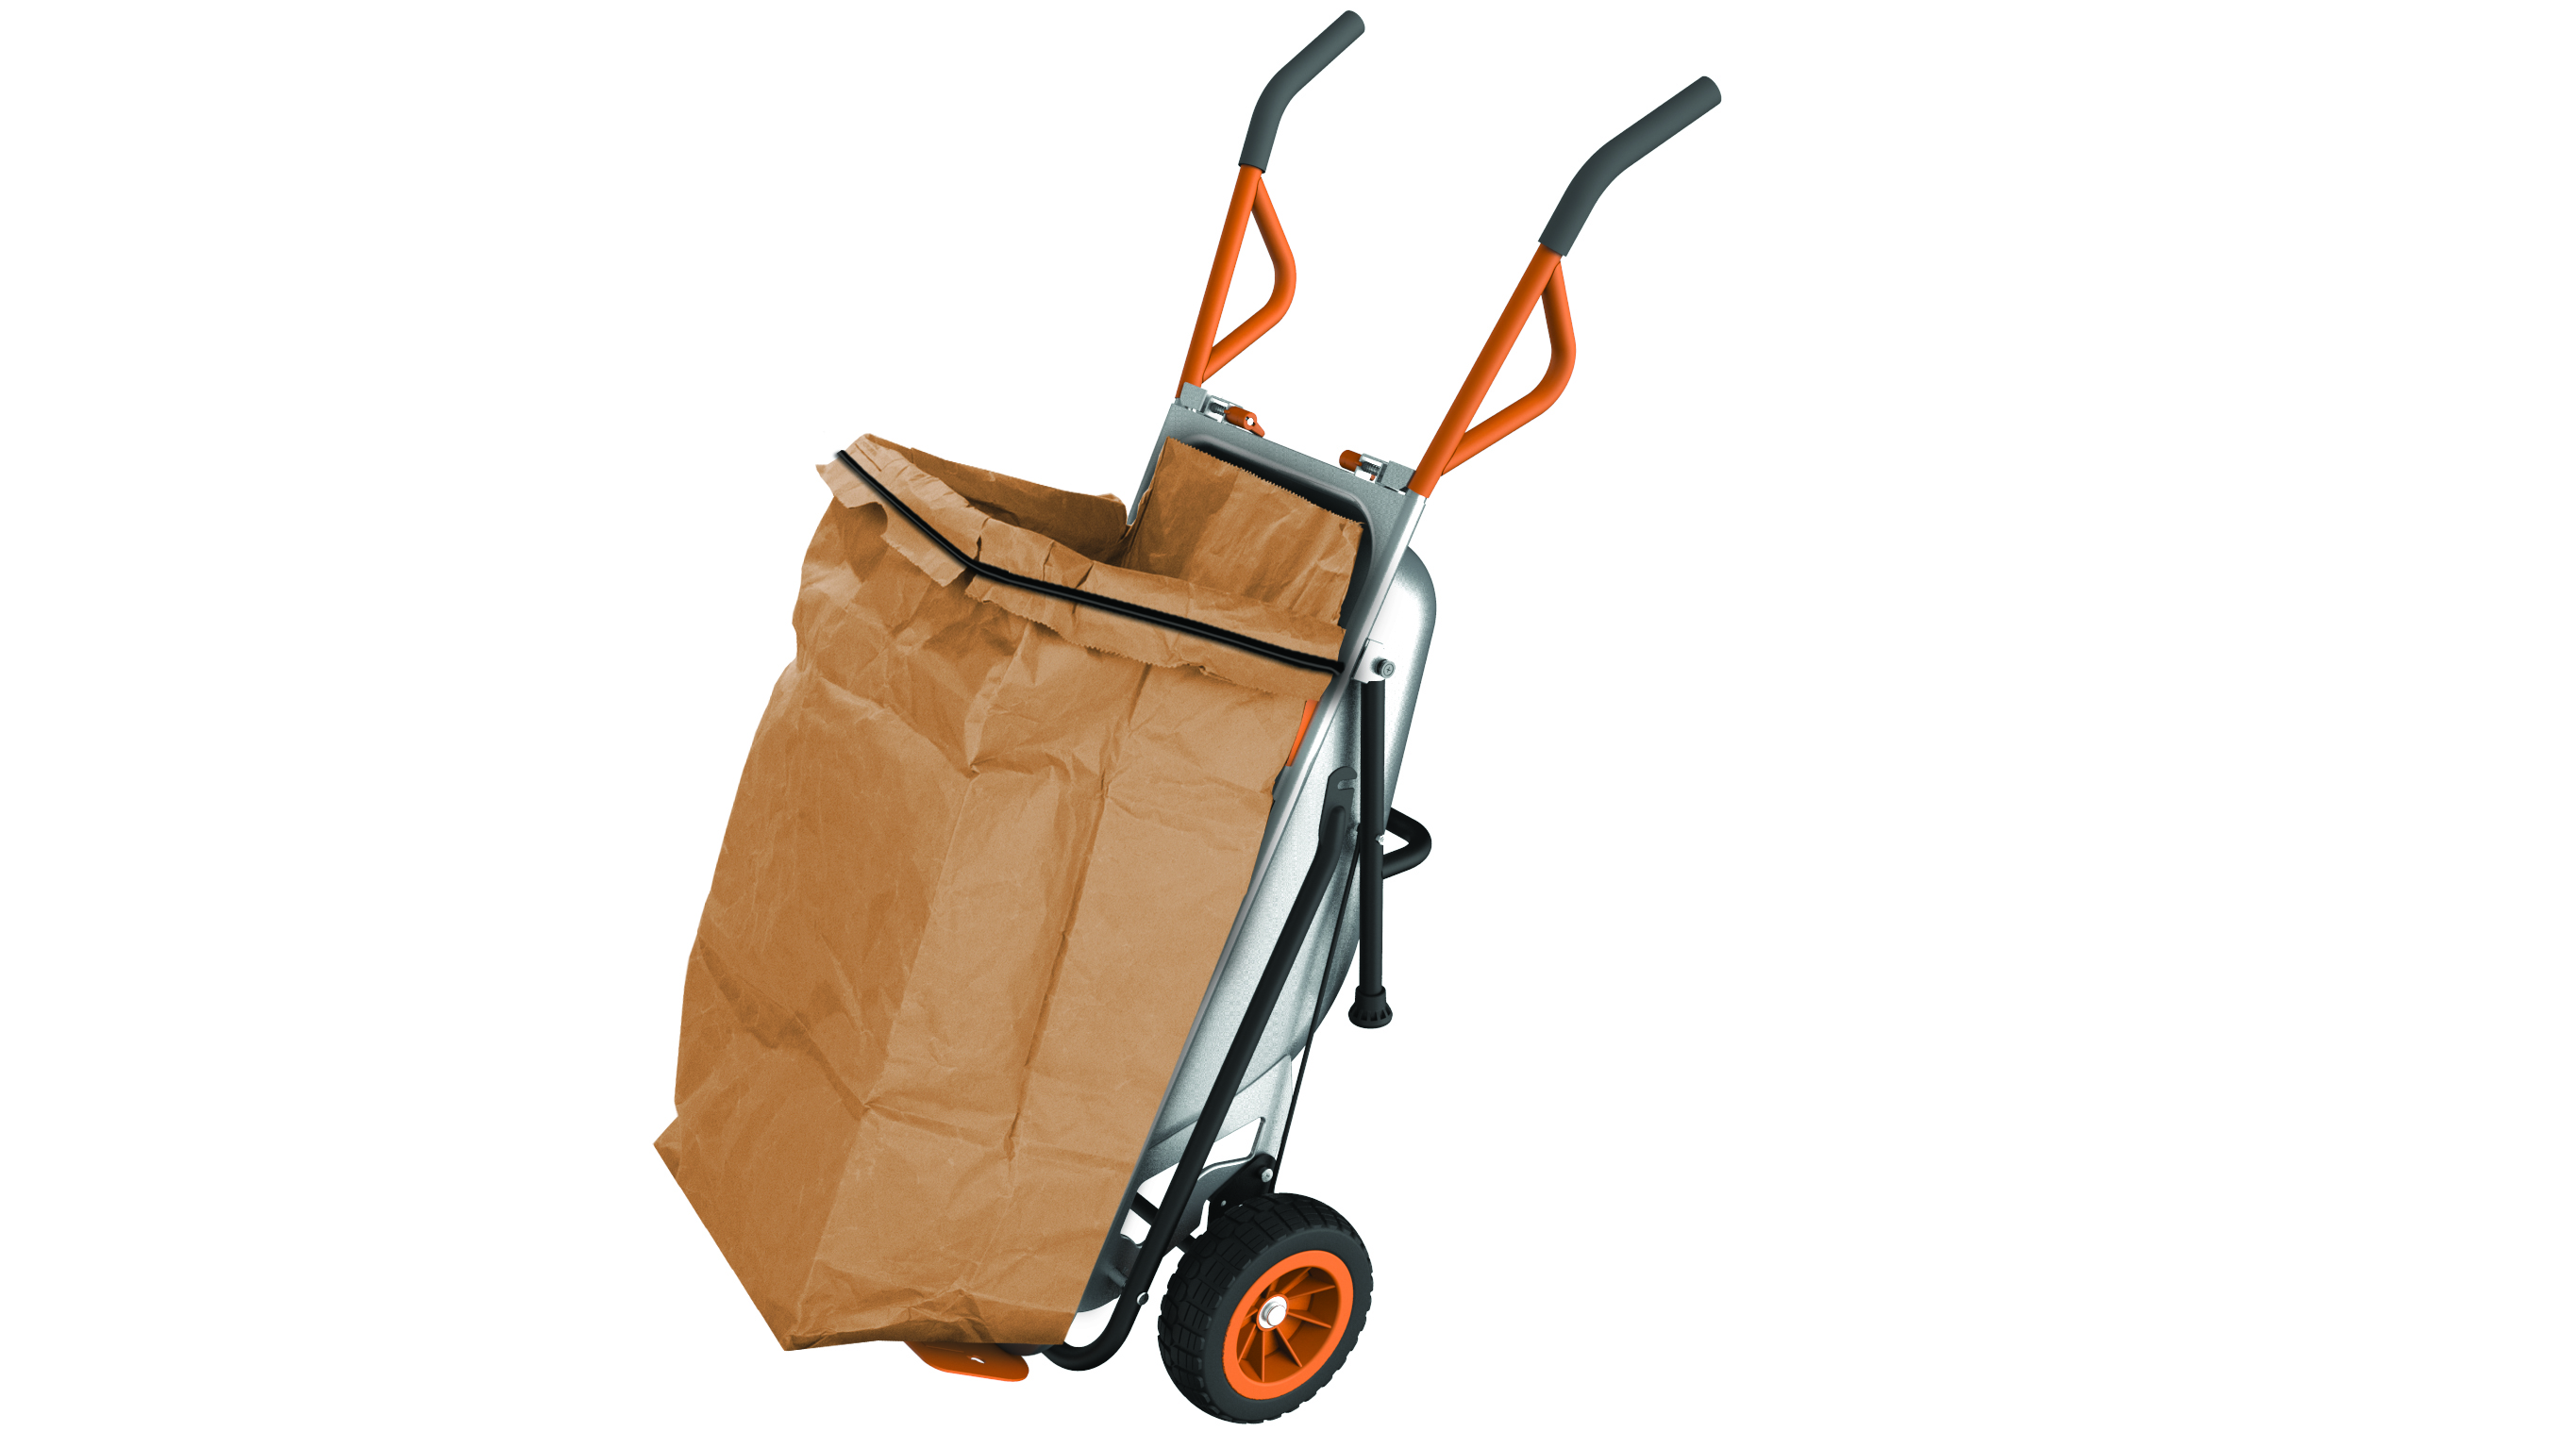 WORX AeroCart's bag holder accessory secures refuse bags for loading leaves, grass clippings and debris.